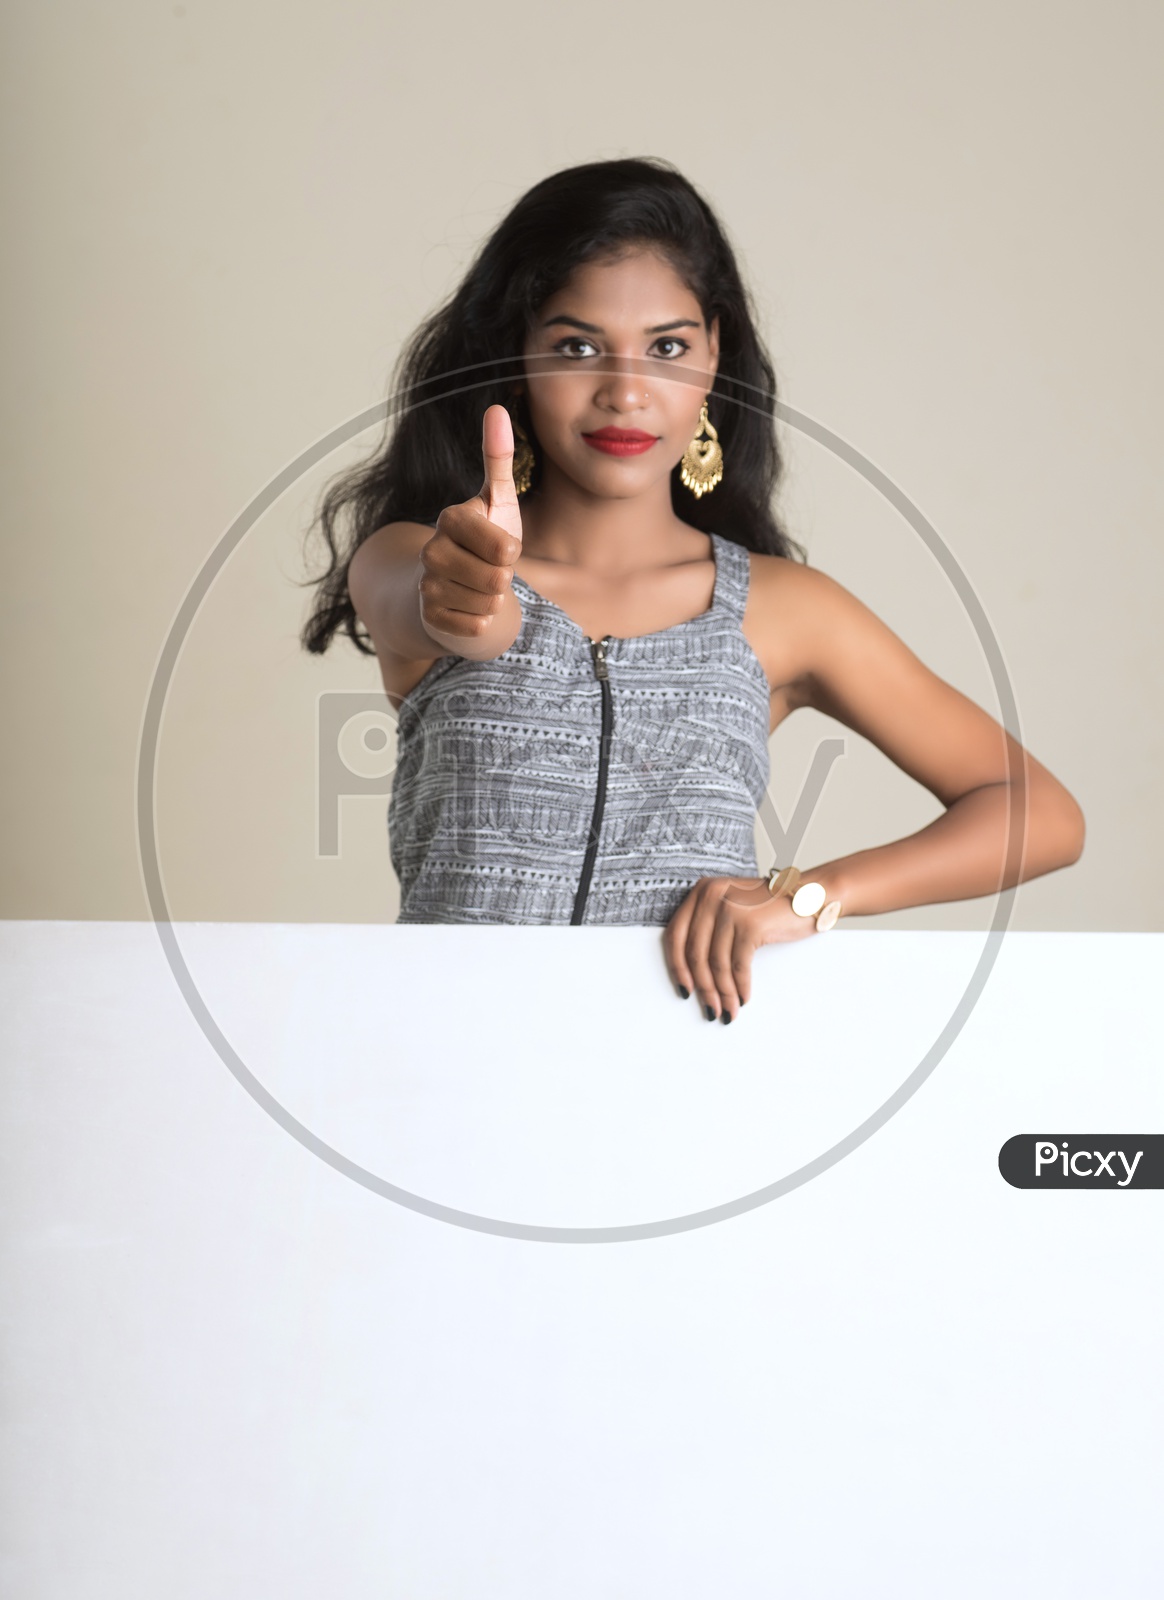 Indian woman holding a white board making a thumbs up sign